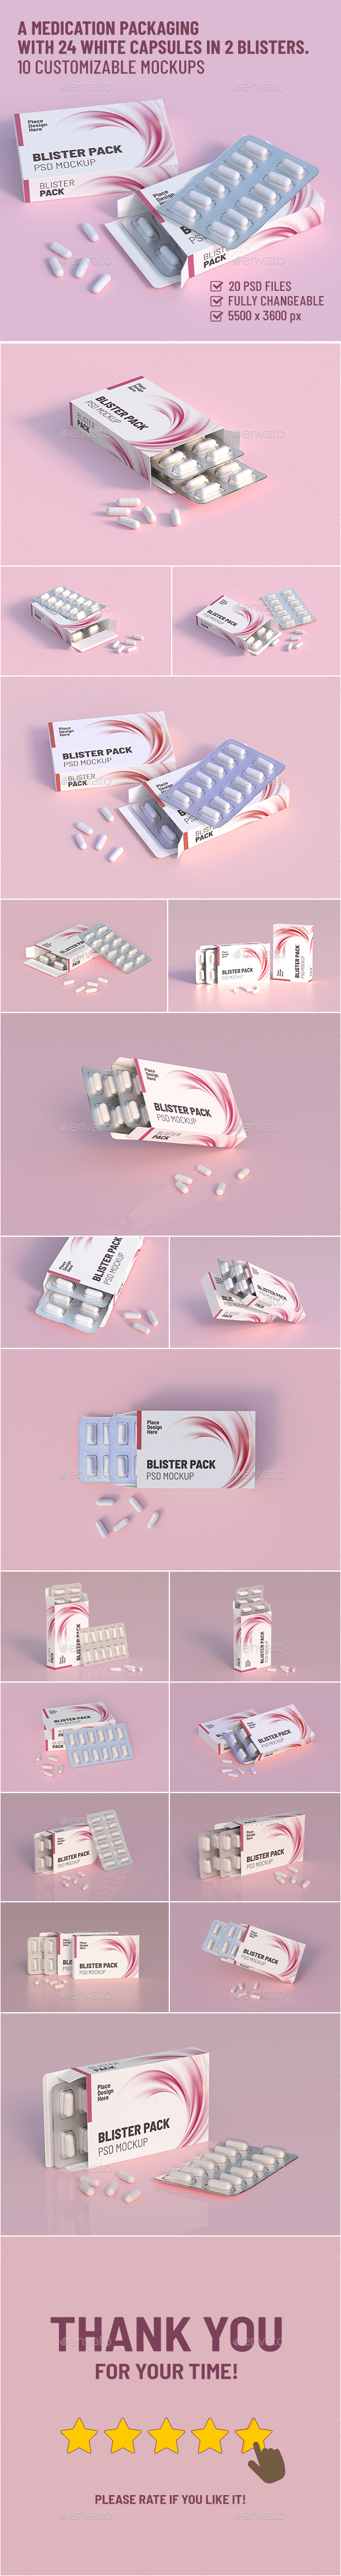 A medication packaging with 24 white capsules in 2 blisters. 20 customizable mockups